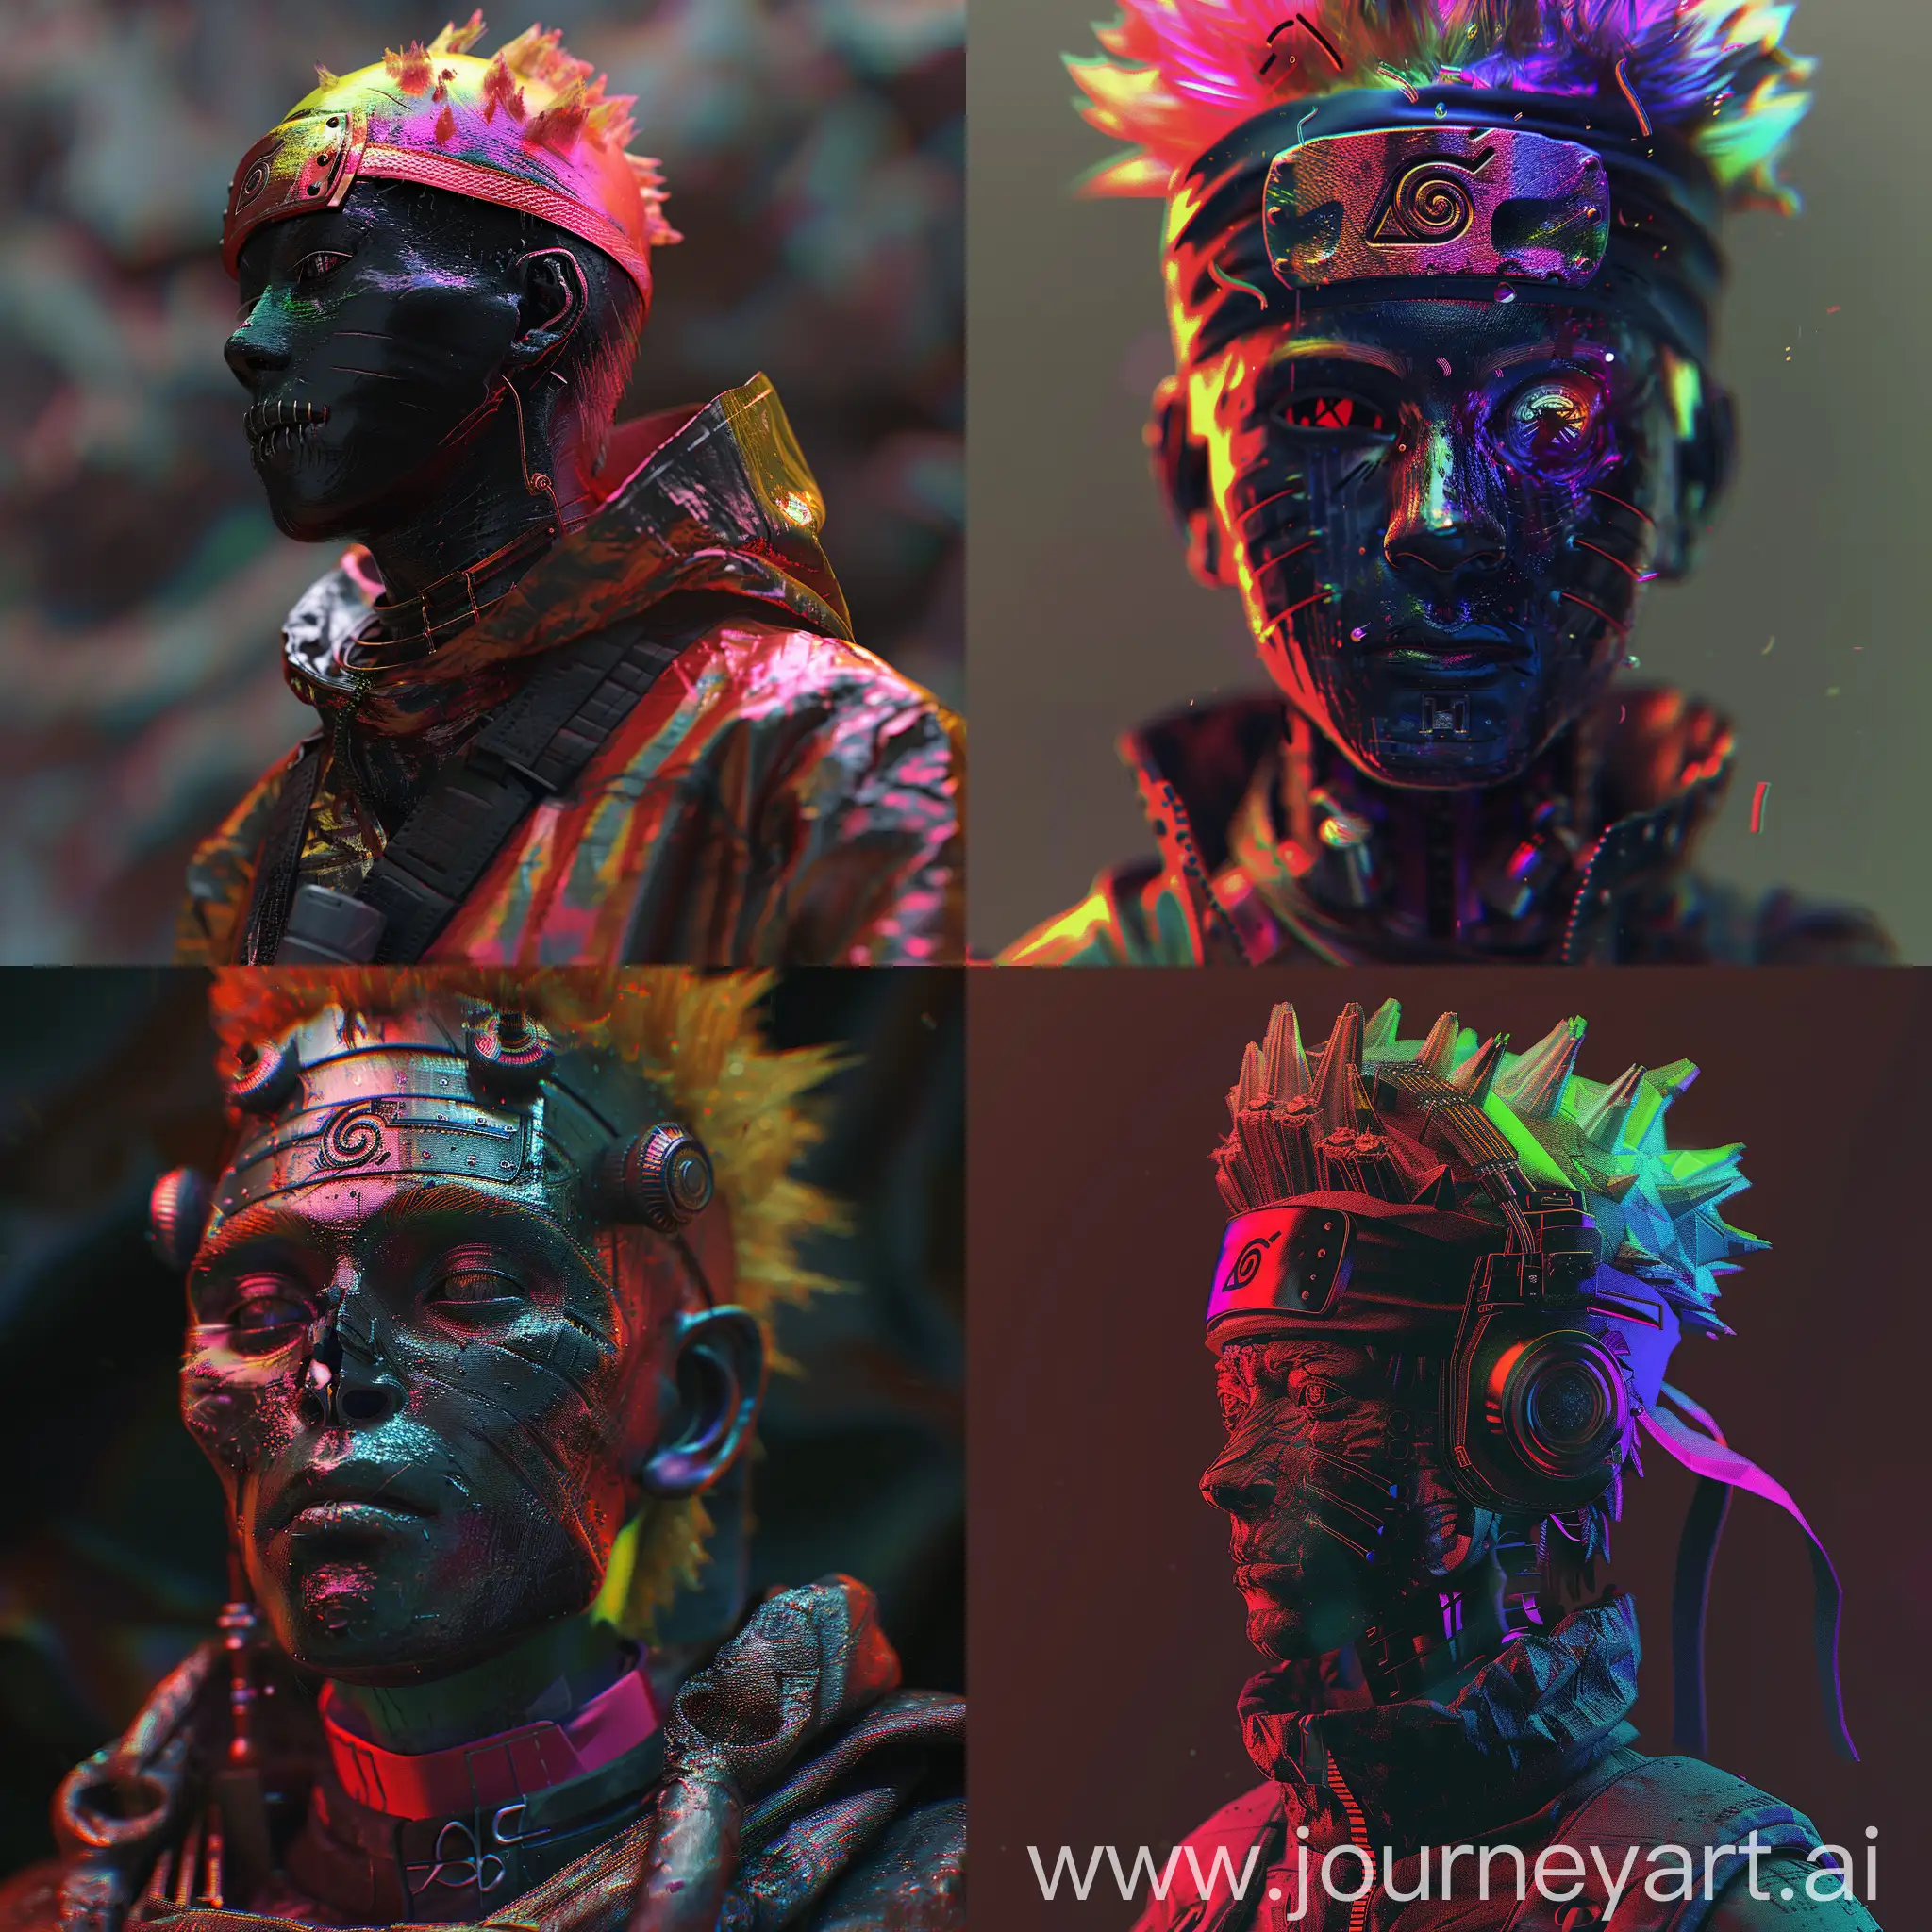 Naruto as a black person in the style of rembrandt, anime style, portrait, cyberpunk mandalorian, skull, hdr, overcolored, Rainbow colored, futuristic, highly detailed, made with blender